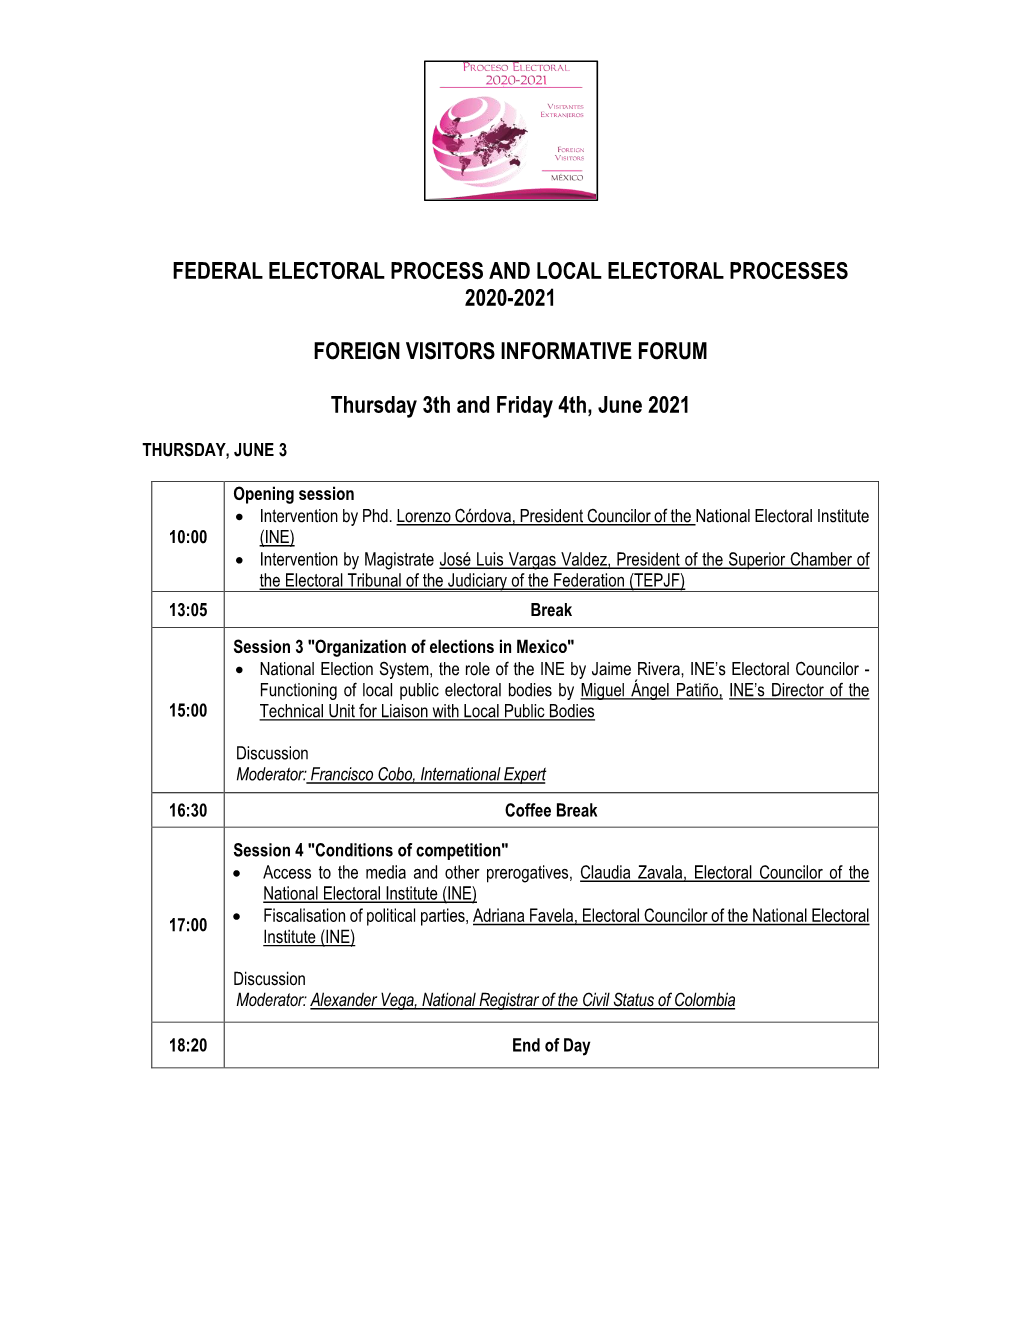 FEDERAL ELECTORAL PROCESS and LOCAL ELECTORAL PROCESSES 2020-2021 FOREIGN VISITORS INFORMATIVE FORUM Thursday 3Th and Friday 4